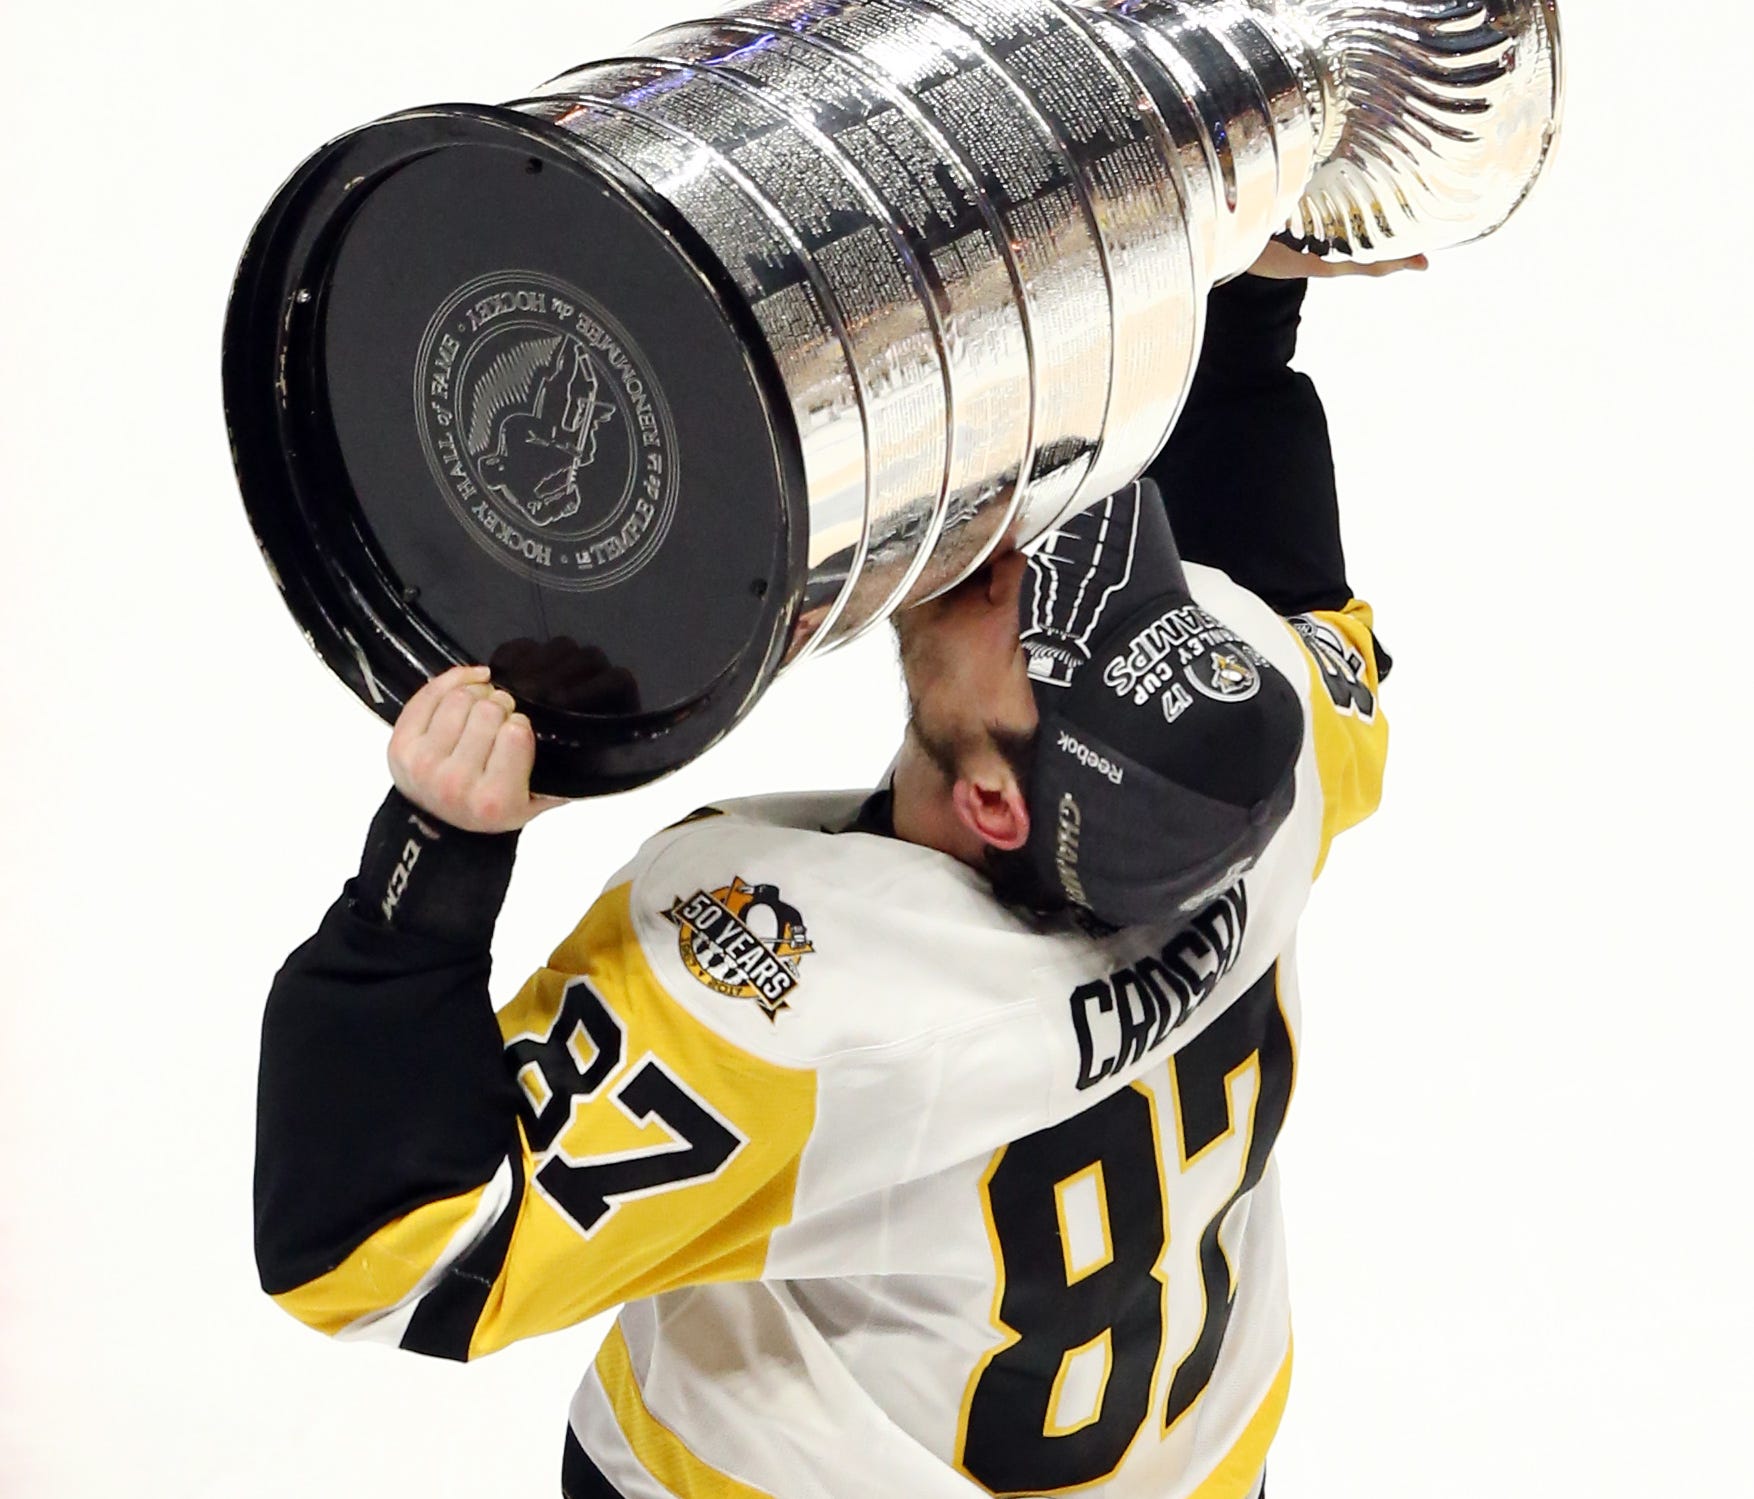 Pittsburgh Penguins center Sidney Crosby kisses the Stanley Cup after defeating the Nashville Predators in Game 6 to win the Stanley Cup.